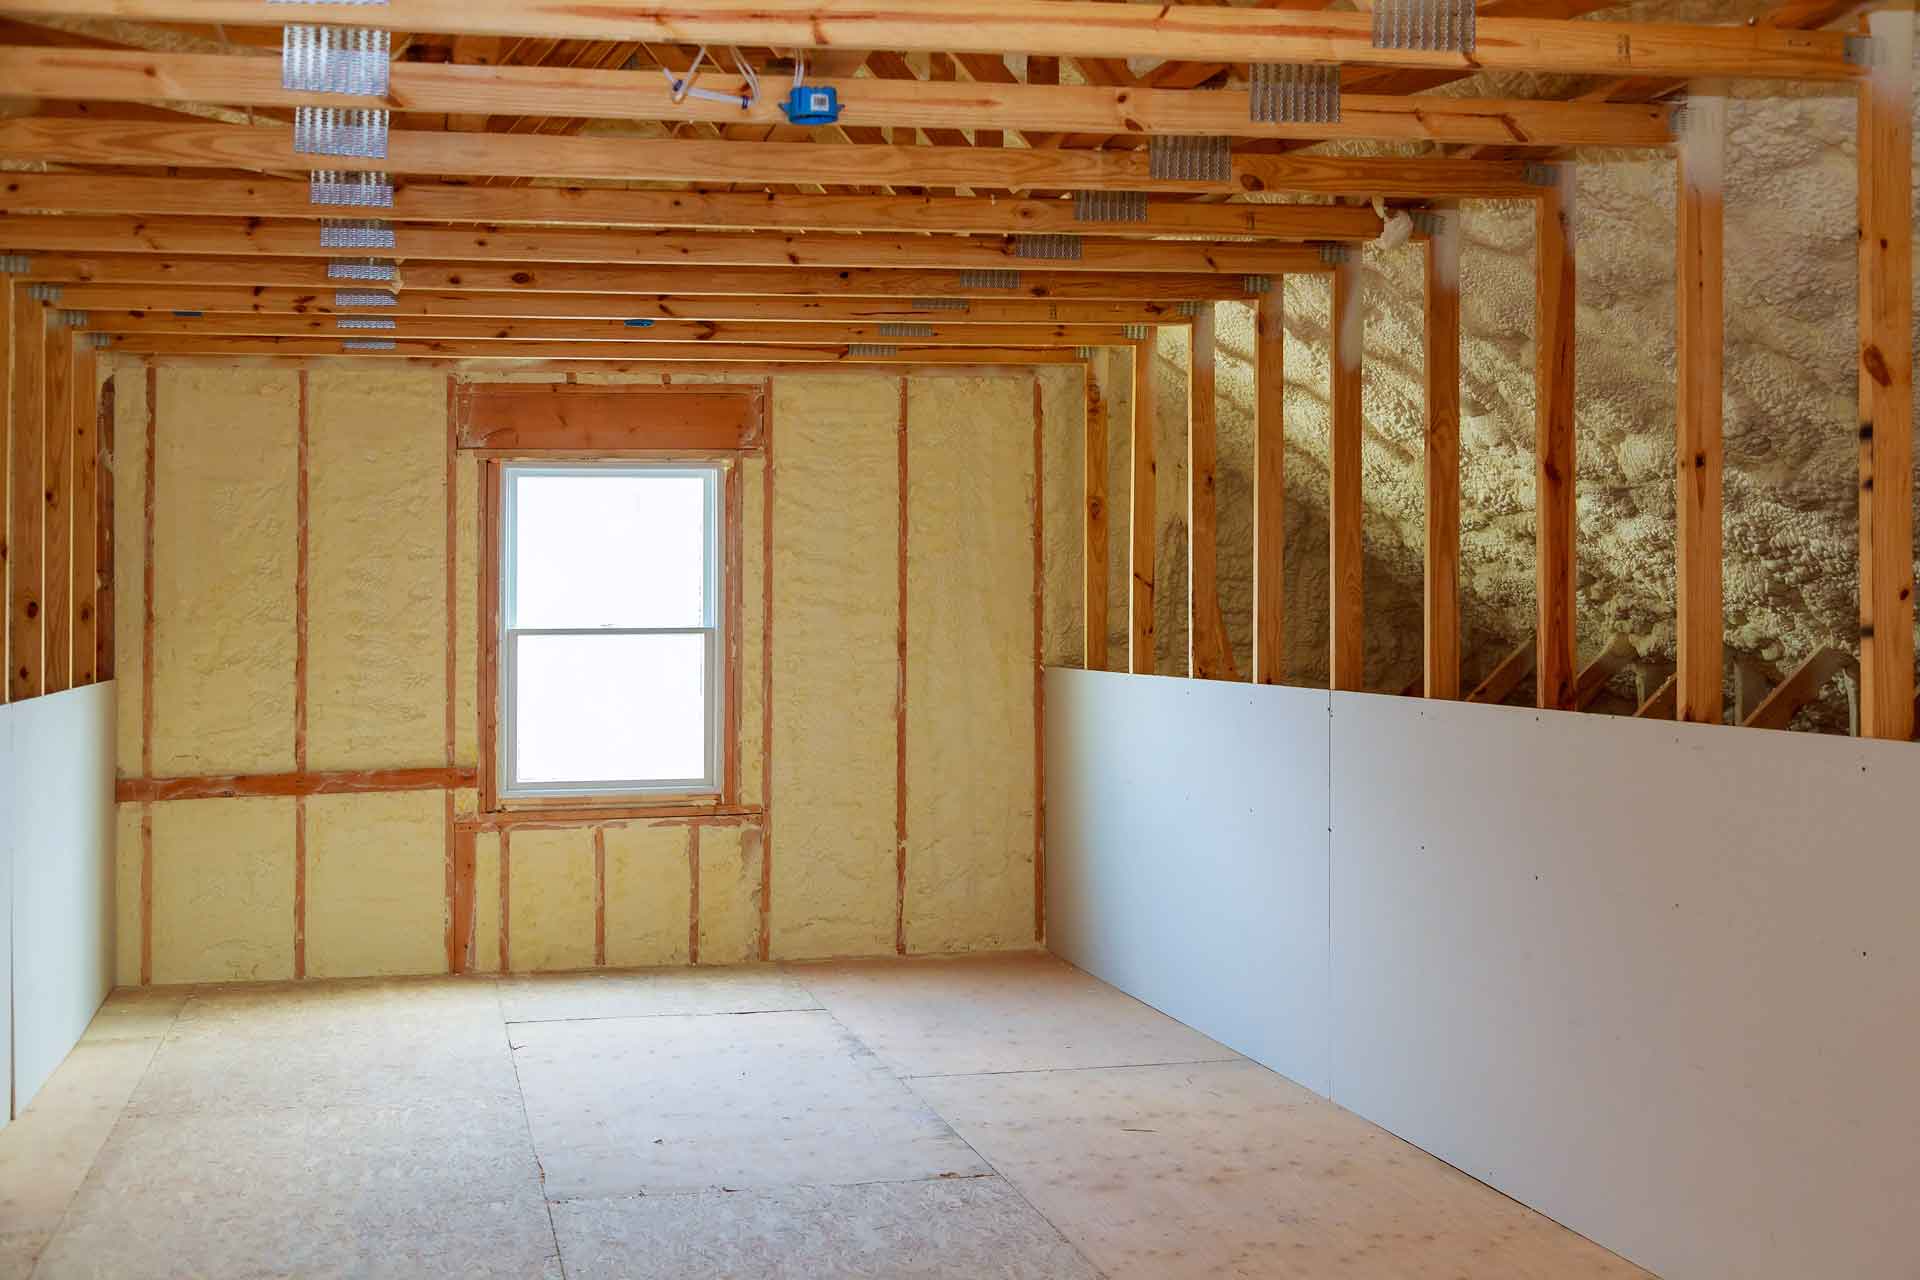 Mid-construction home with new spray foam insulation